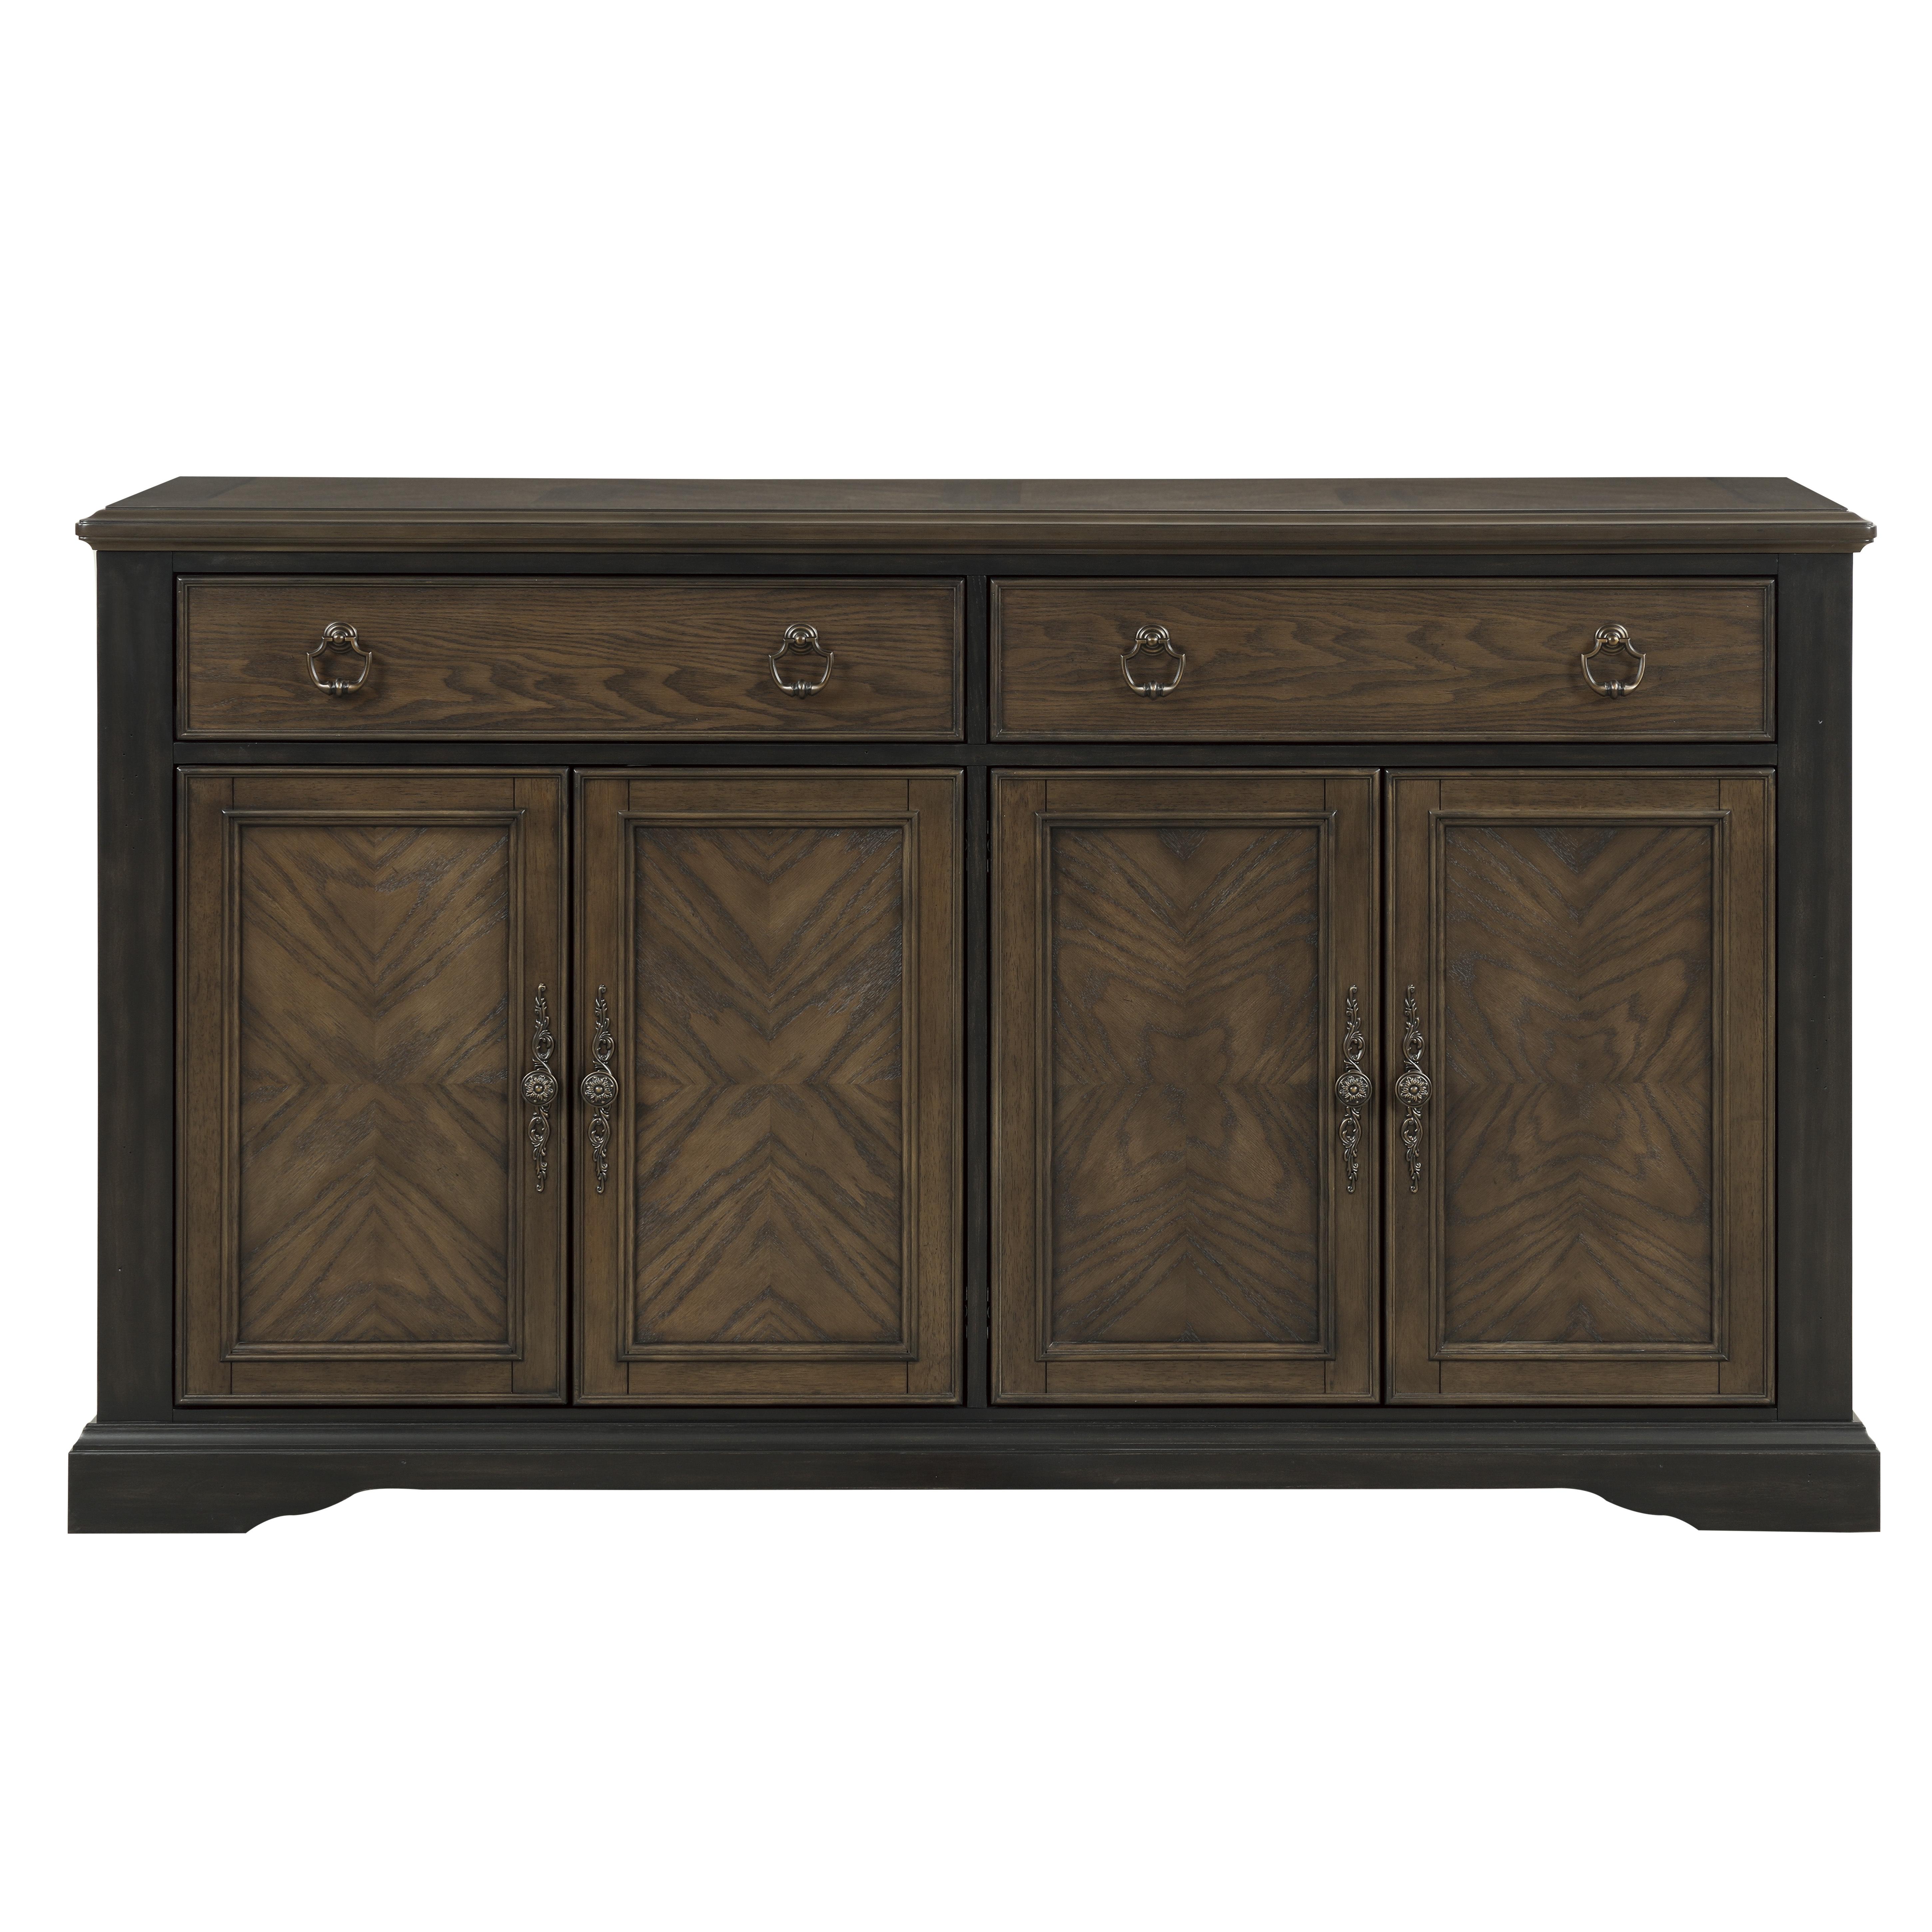 Traditional Server 5703-40 Stonington 5703-40 in Brown 